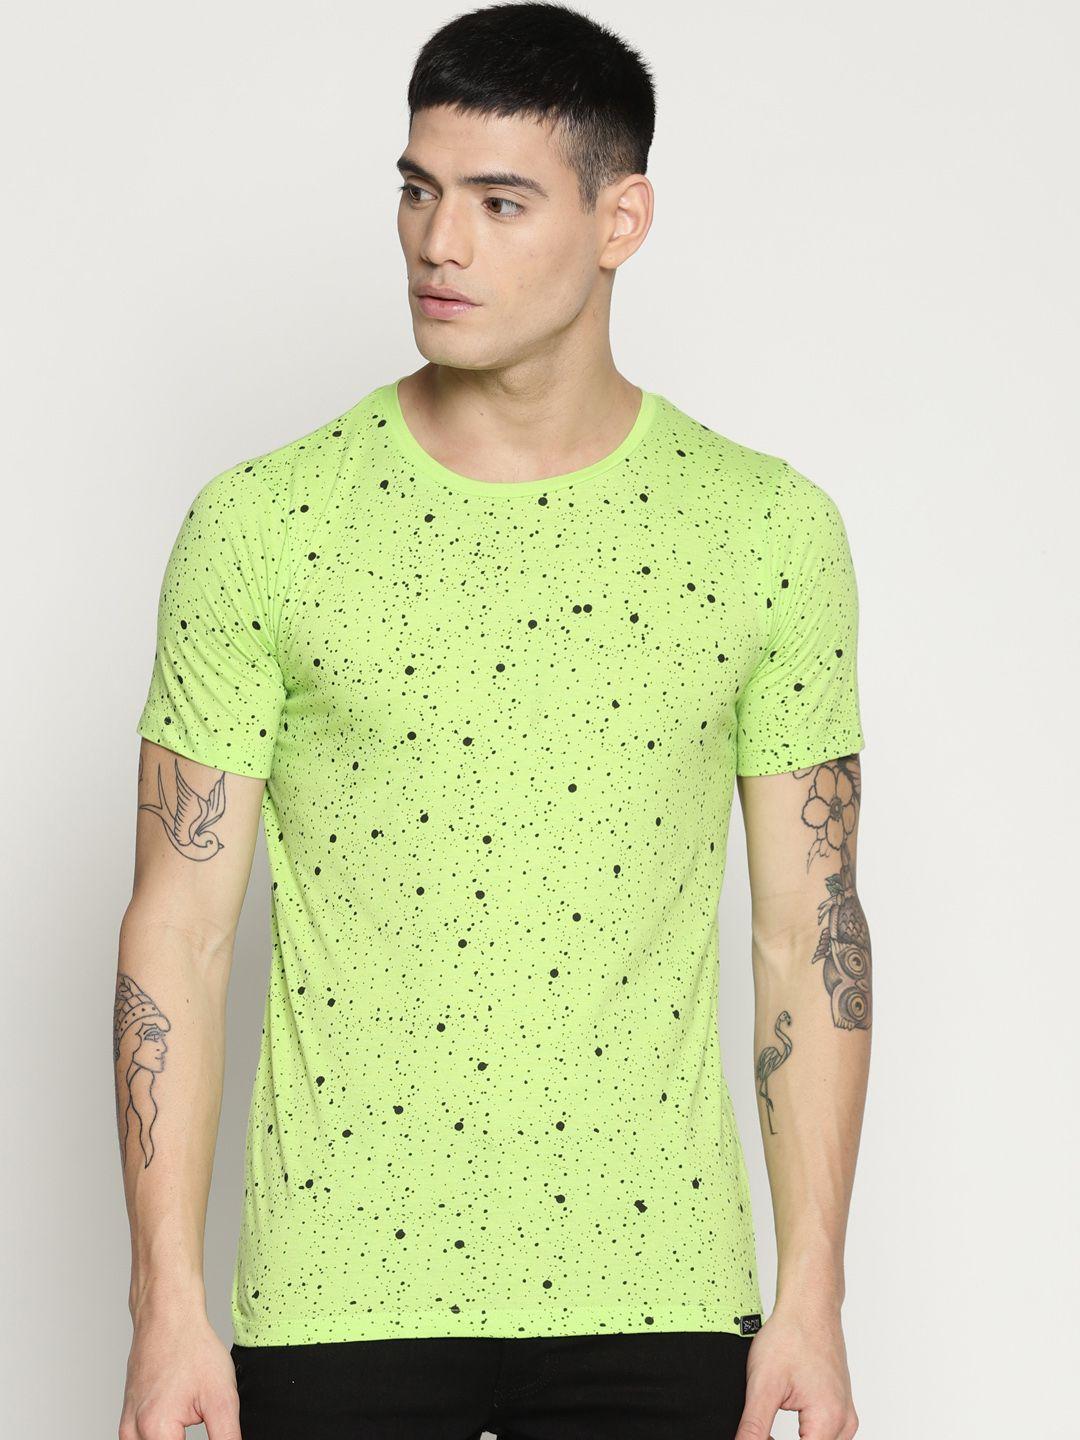 impackt men lime green printed round neck t-shirt